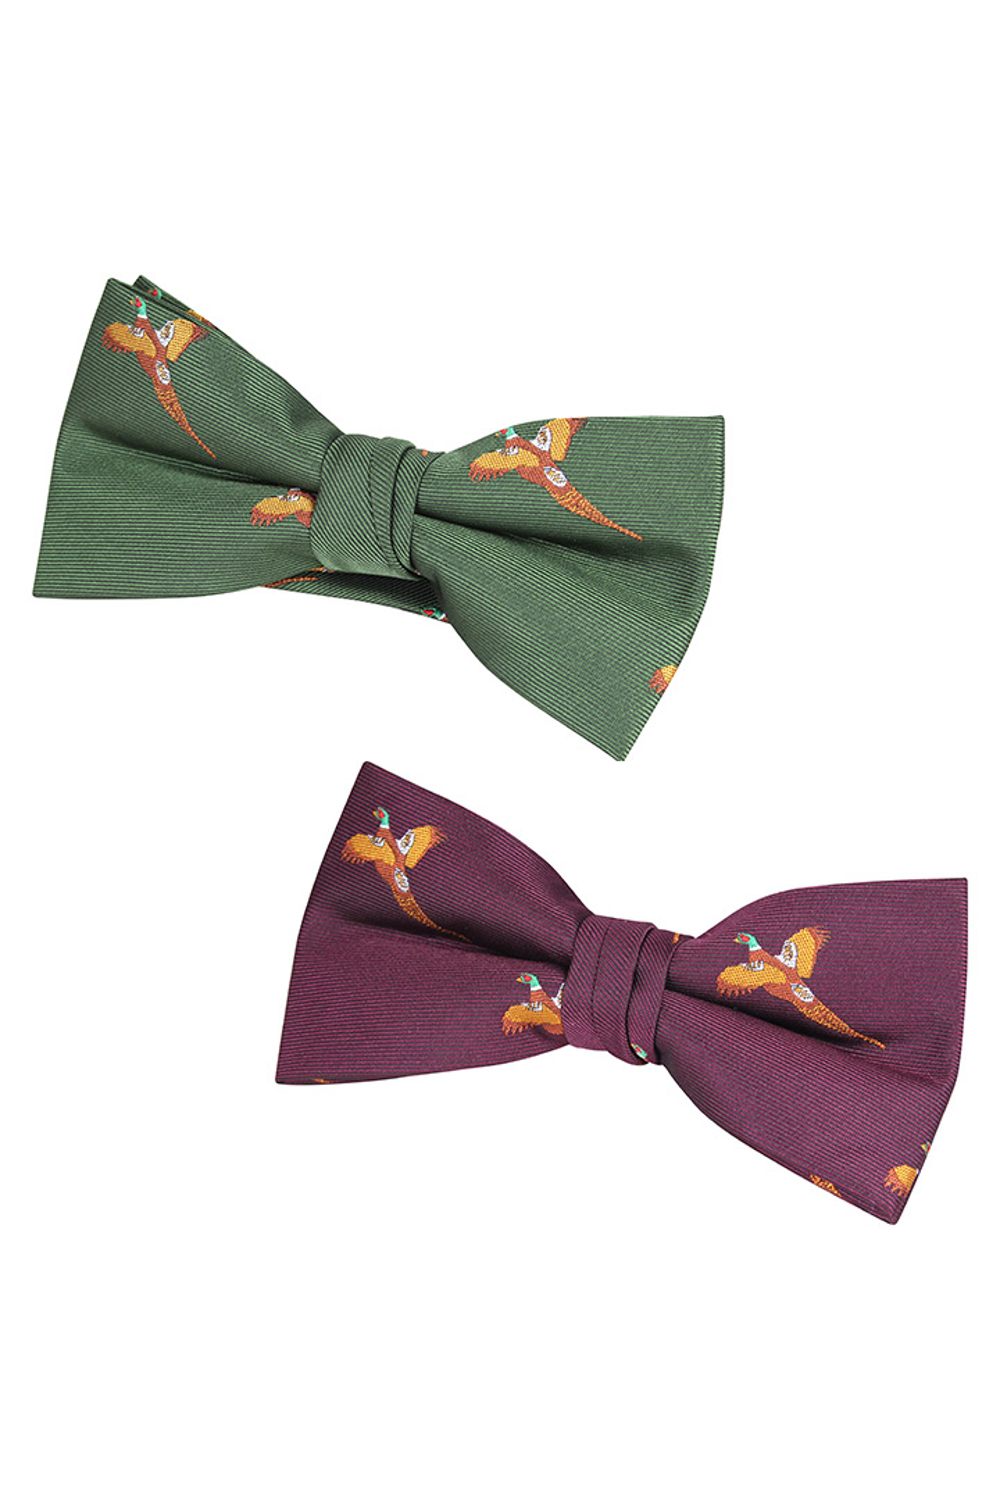 Jack Pyke Bow Tie In Pheasant Green and Wine